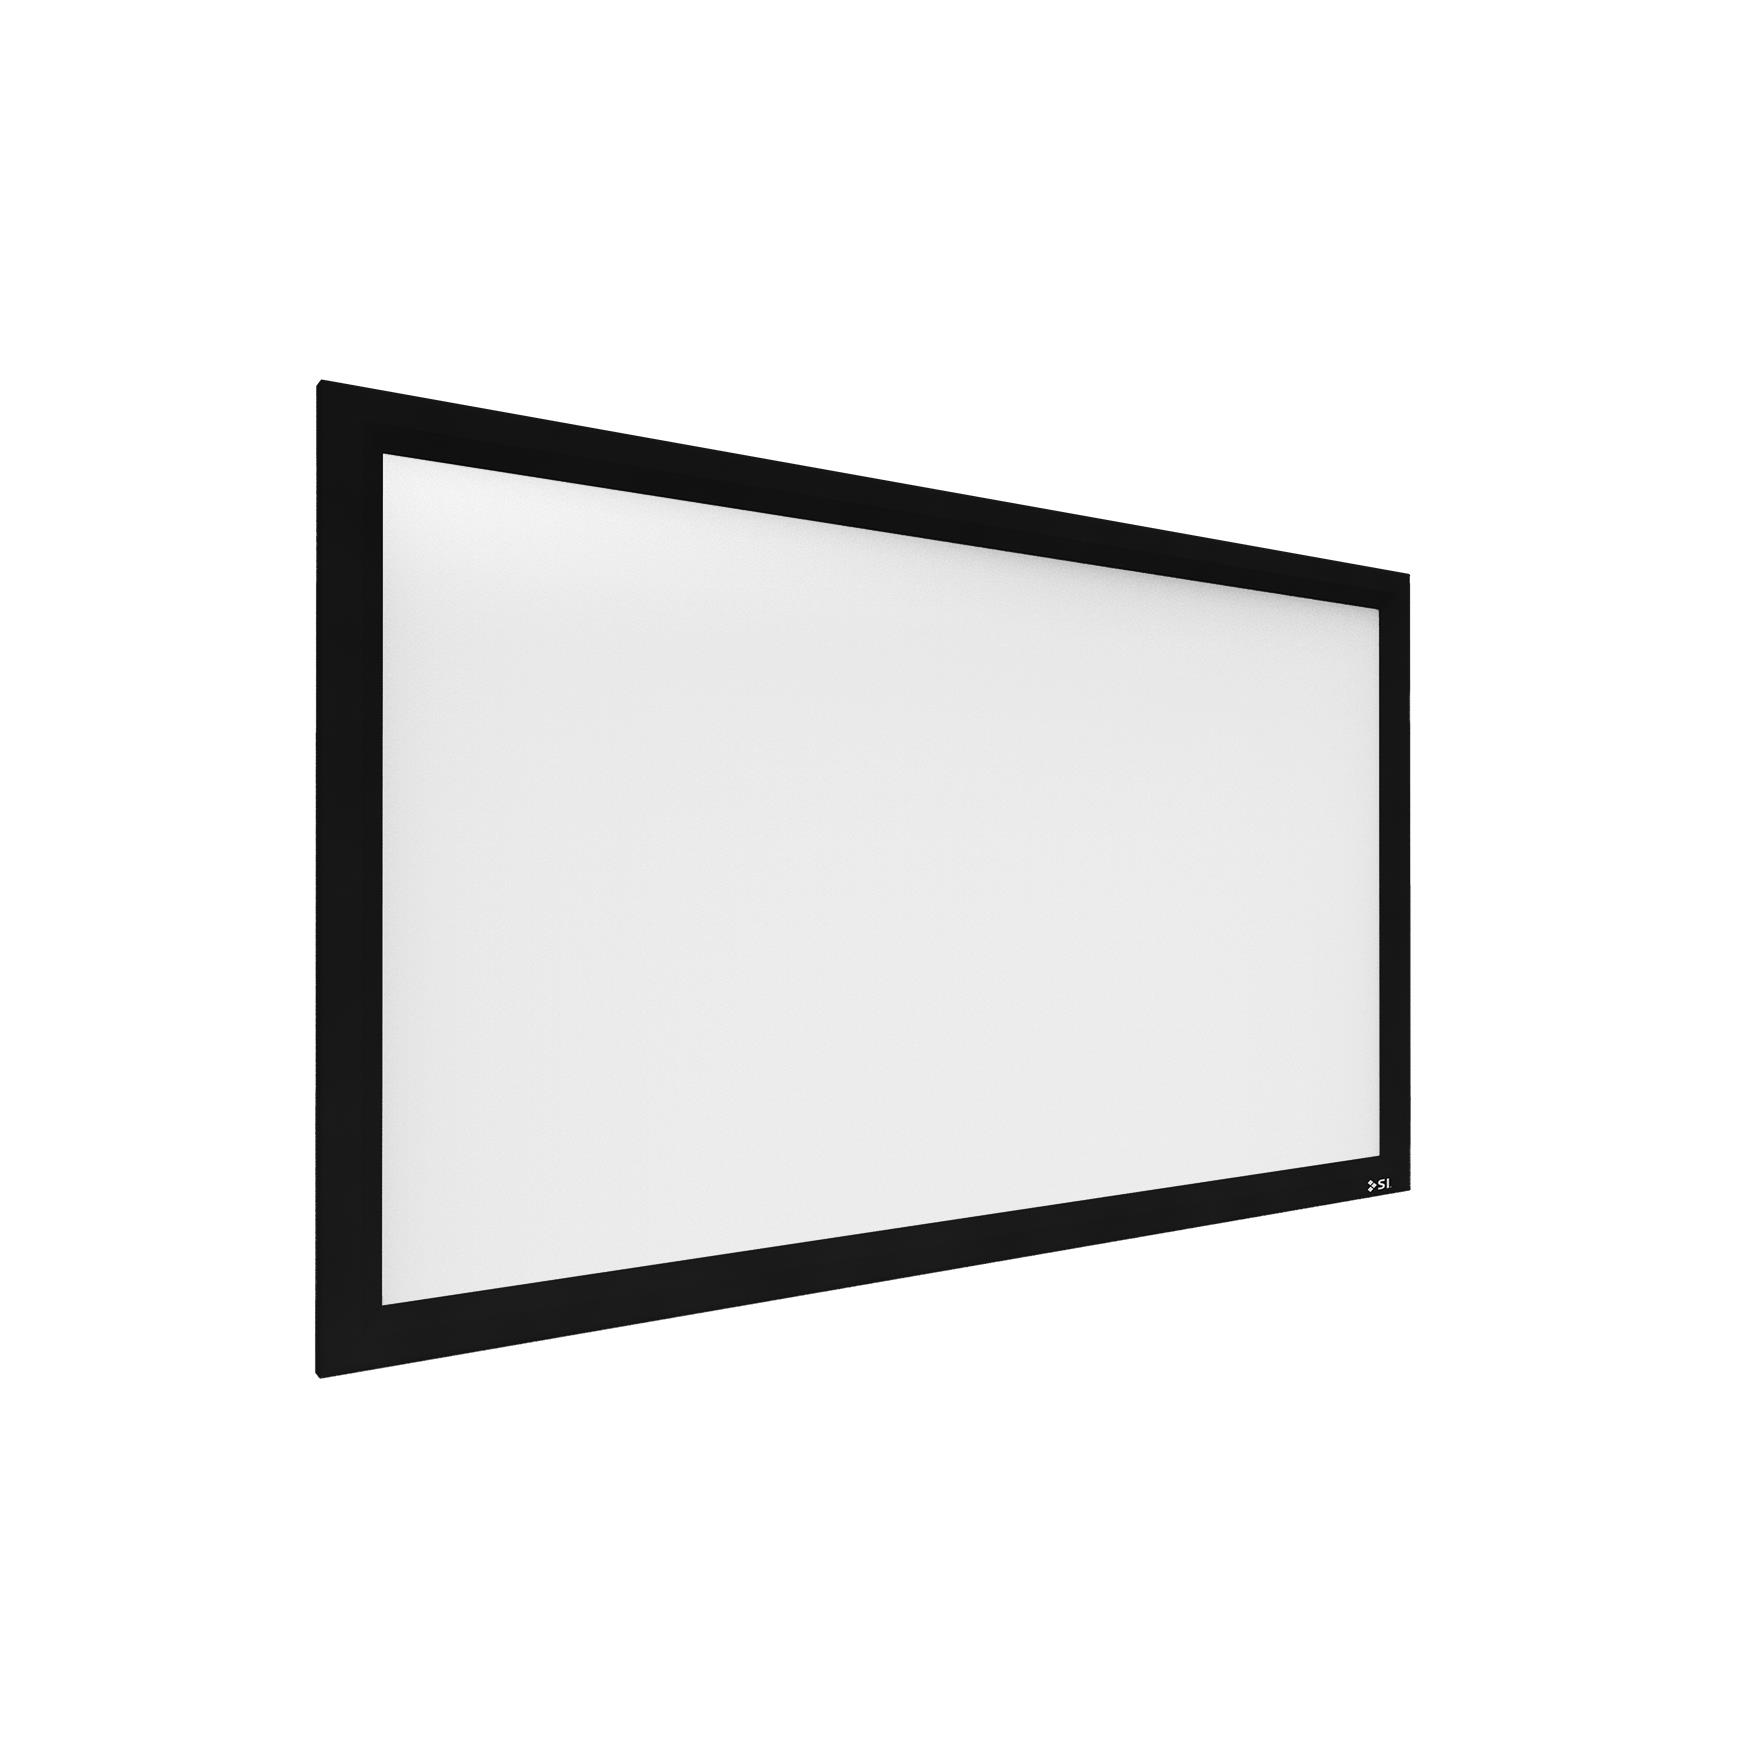 Screen Innovations 3 Series Fixed - 110